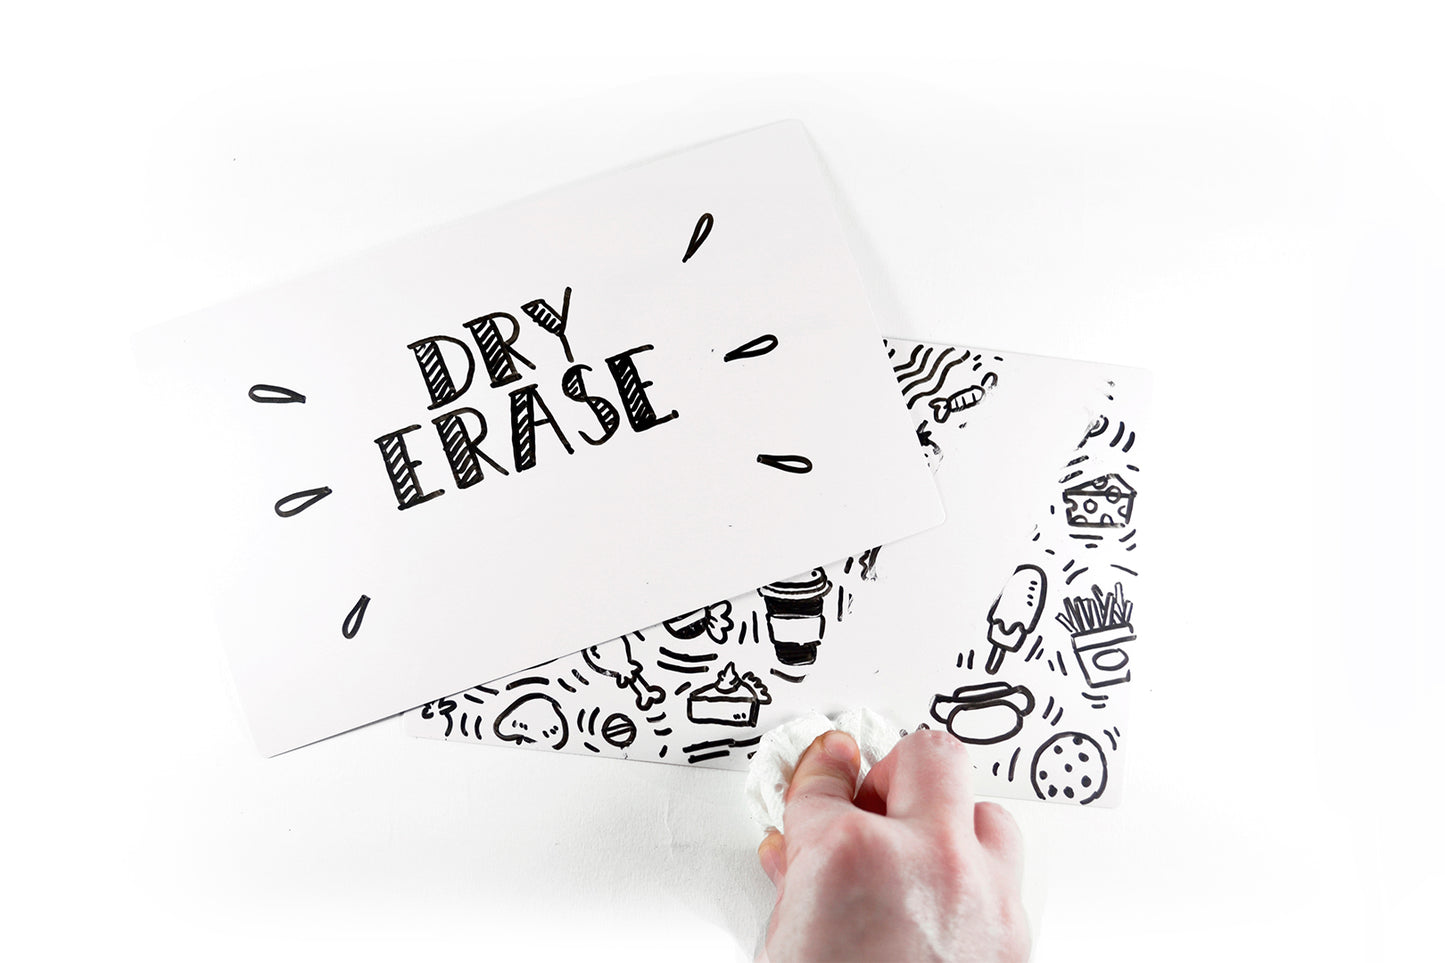 Reusable Giant Dry Erase Index Cards (5" x 8") – 30 Card Pack